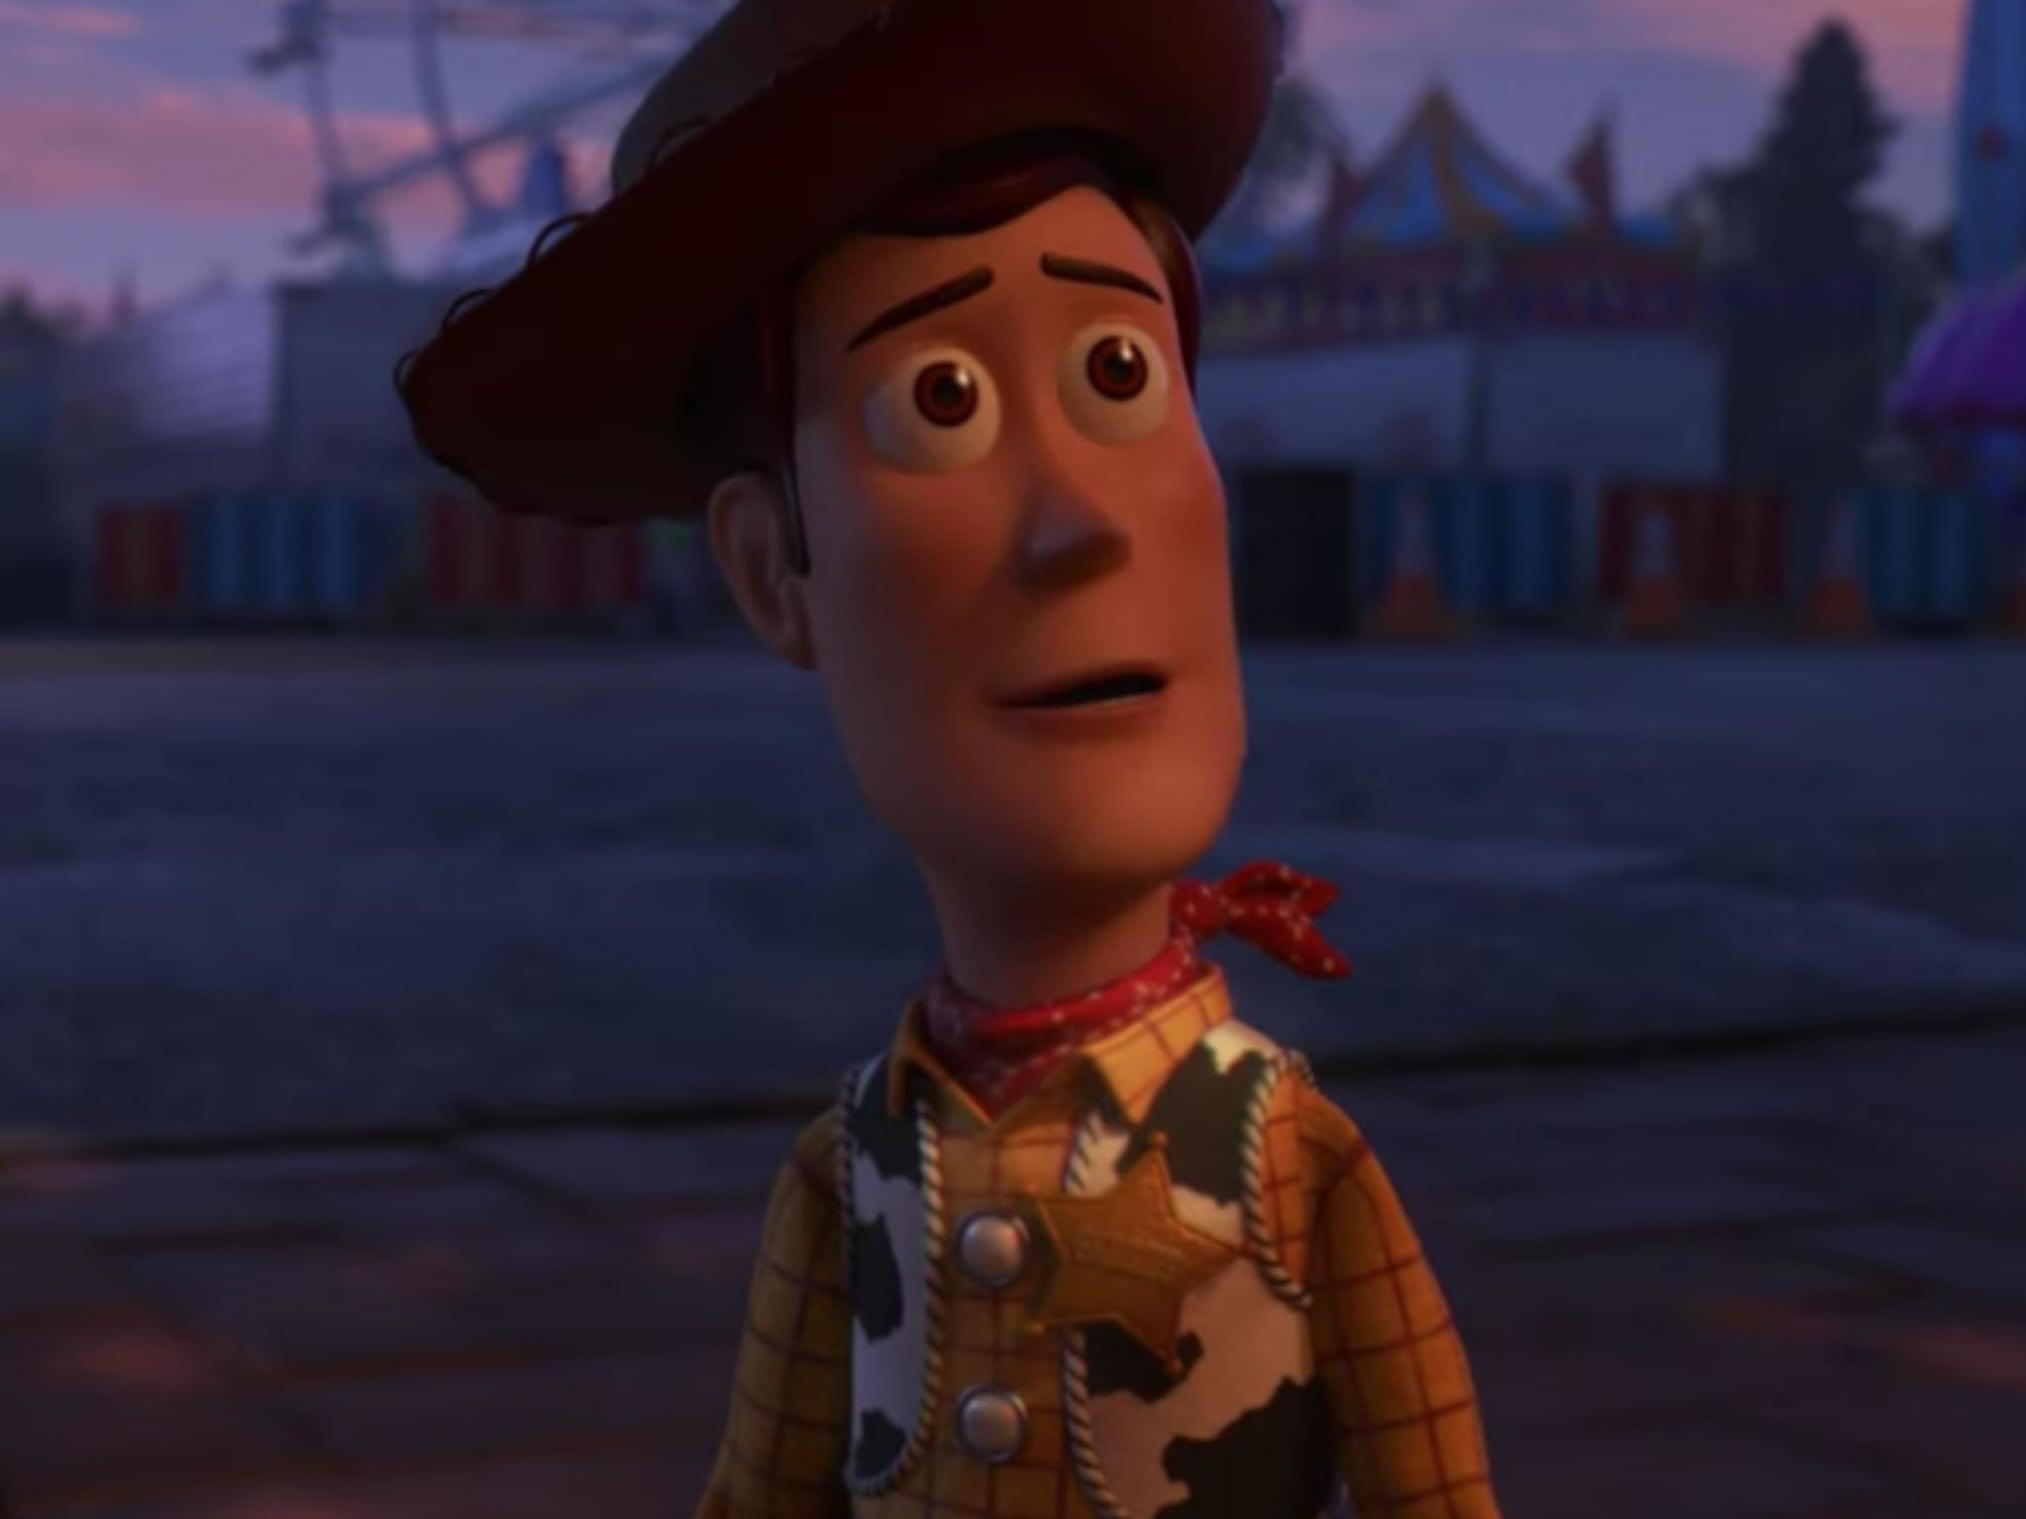 Toy Story 4 trailer teases emotional end to Woody and Buzz journey